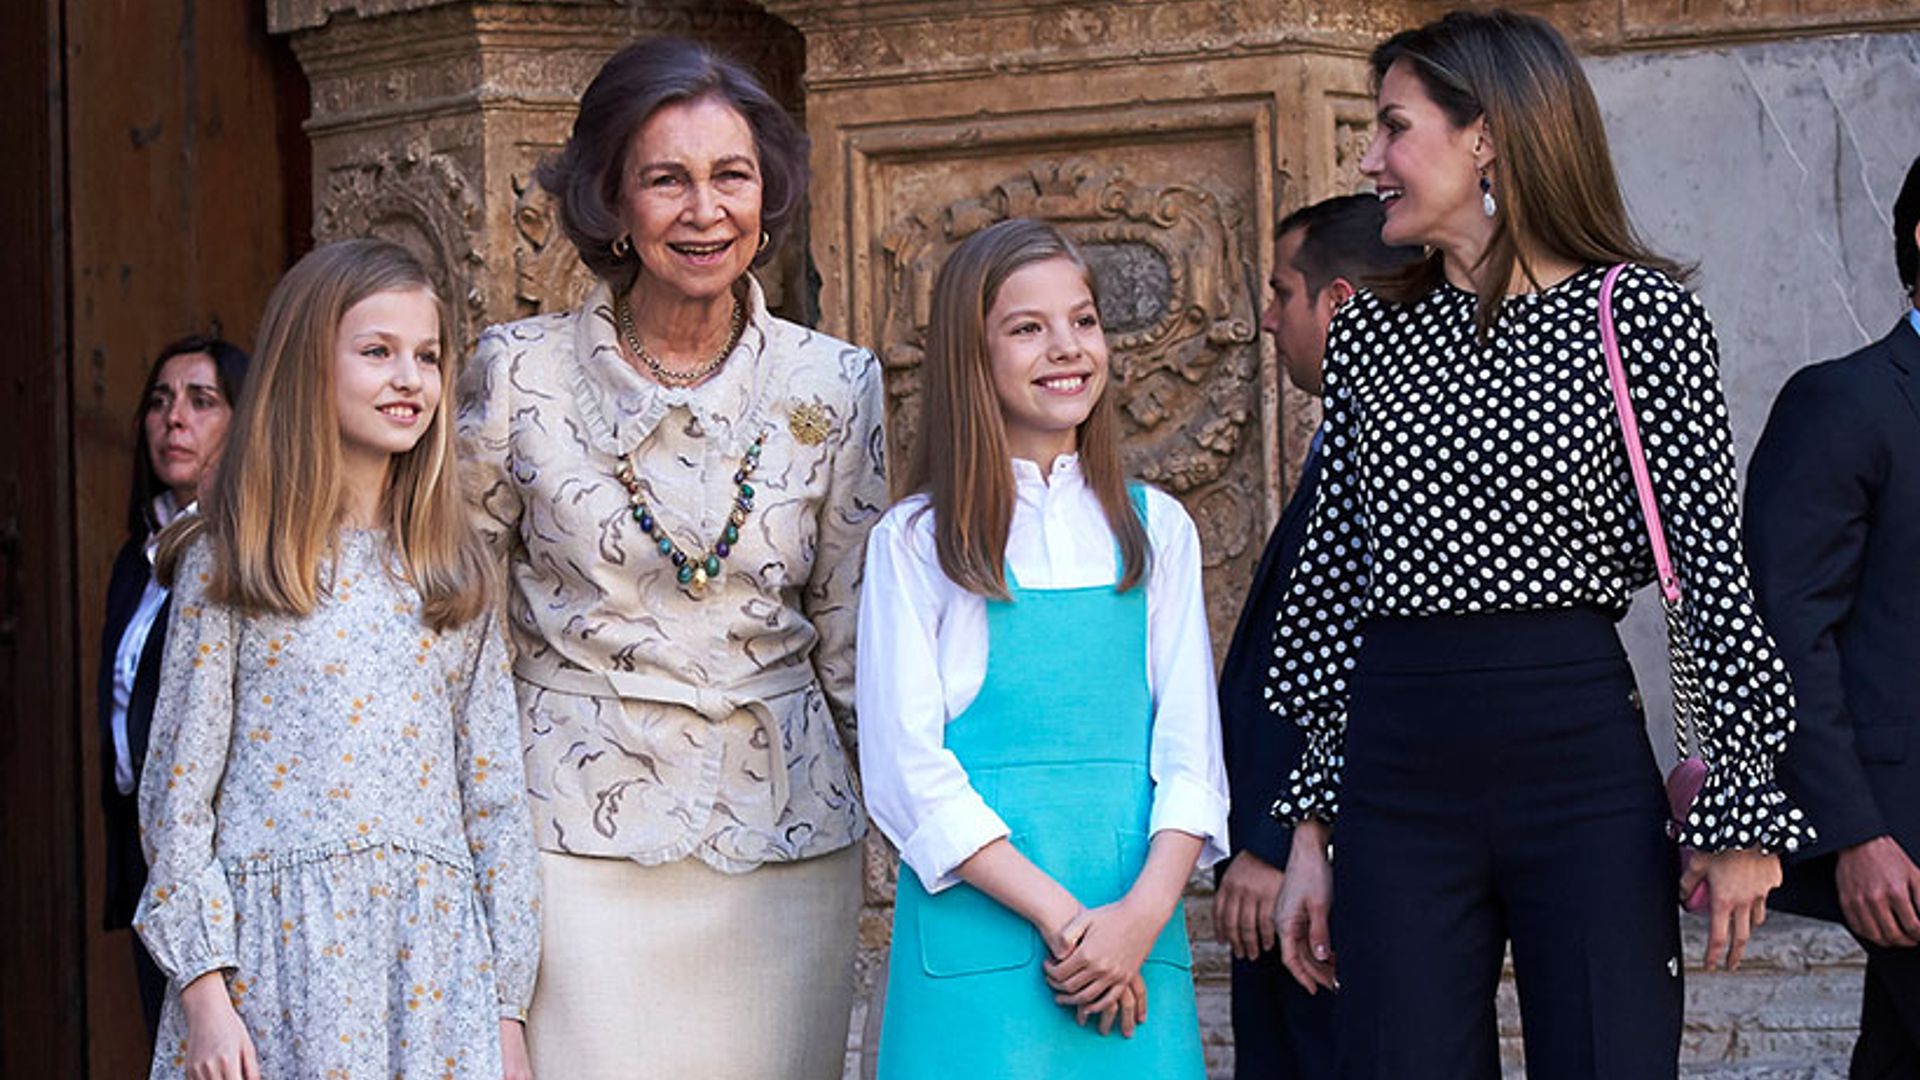 Watch Queen Letizia of Spain's Easter video that went viral